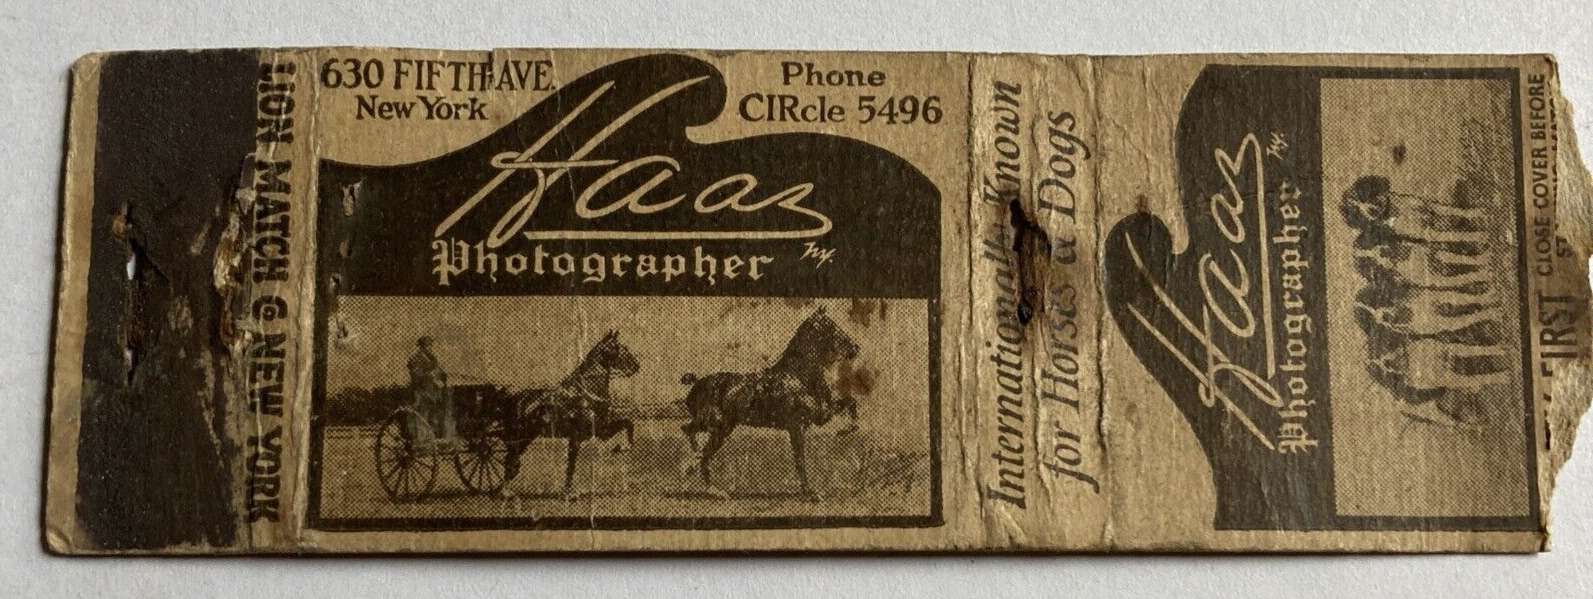 Haas Photographer New York City NY Vintage 1930s Matchbook Cover